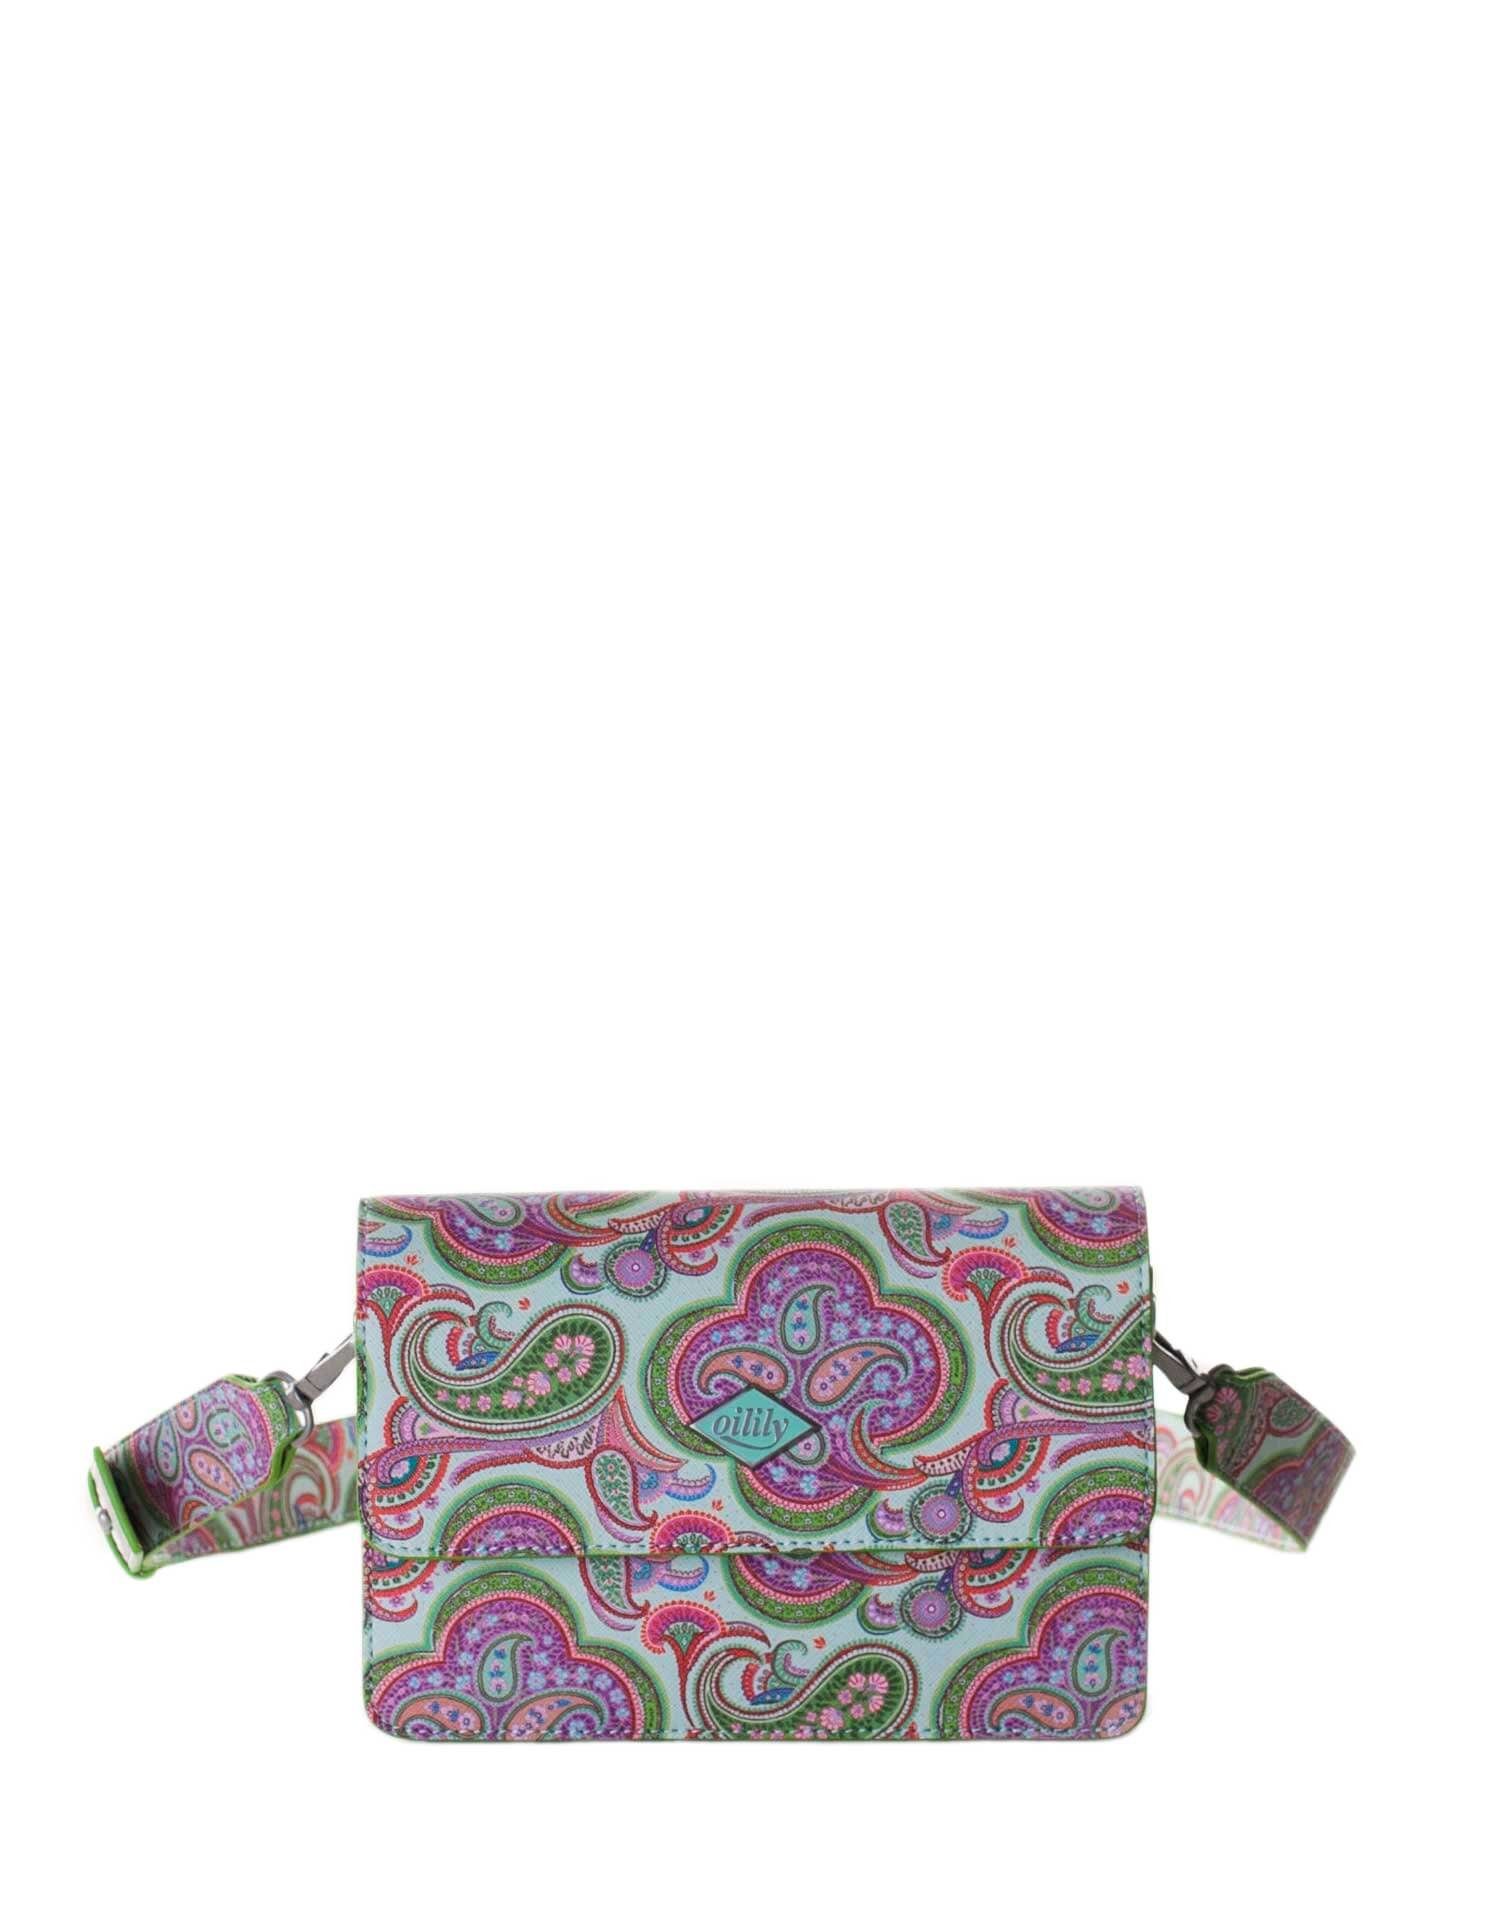 Oilily Schultertasche Summer Paisley S Shoulderbag